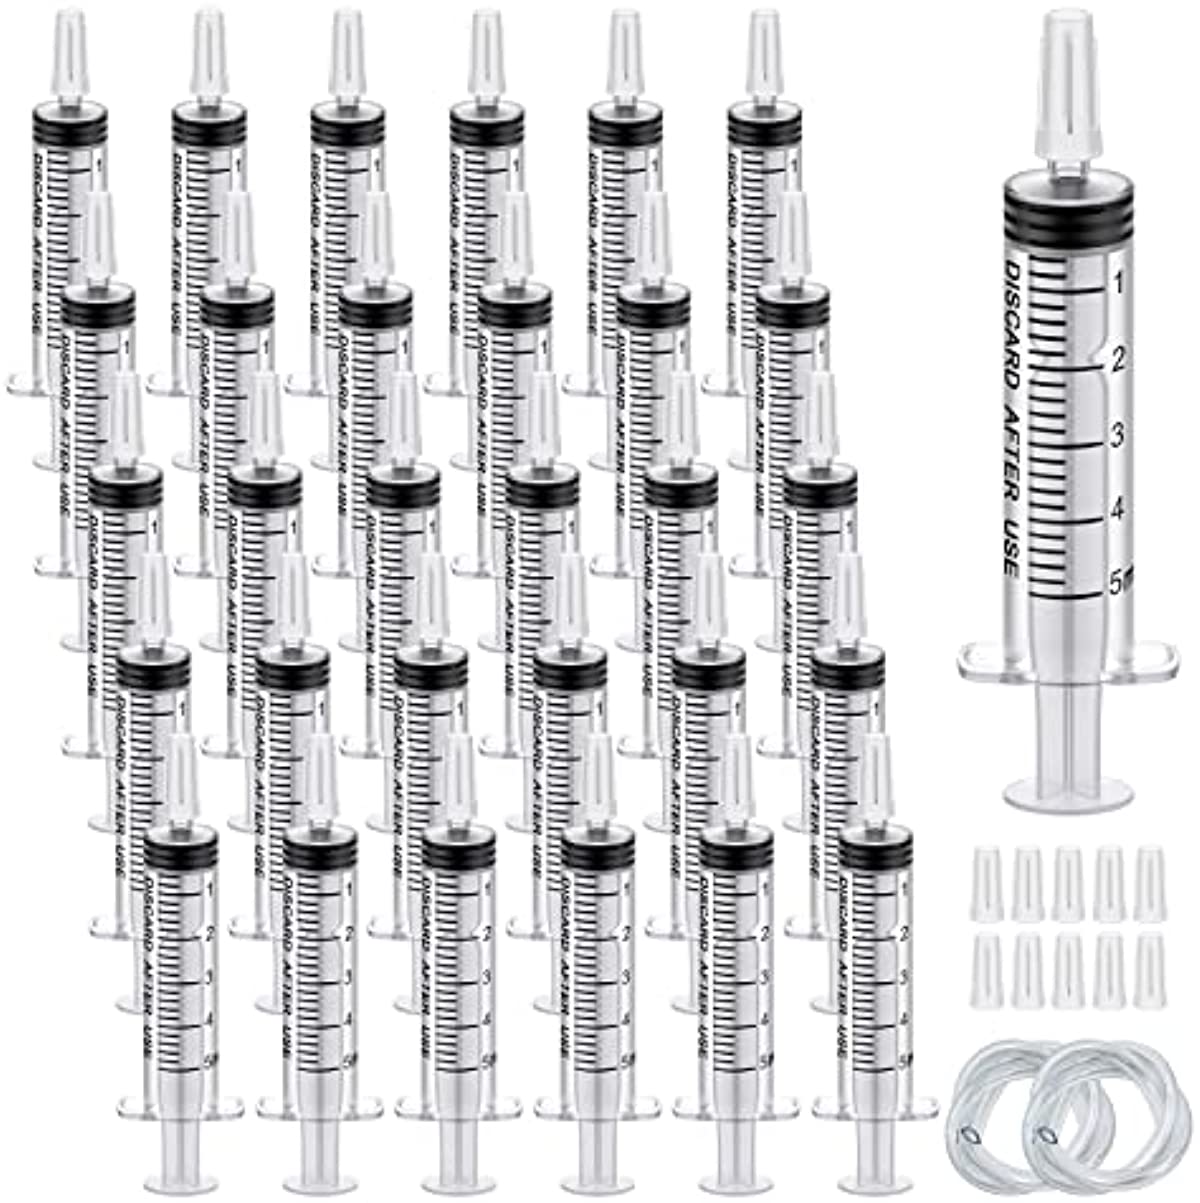 30Pack 5ml Plastic Syringe Sterile Individual Wrap with Tip Cap&Soft Tube, Measurement and Dispensing Syringe Tools for Science Labs,Liquid Measuring,Feeding Pets,Oil or Glue Applicator (5ml, 30)